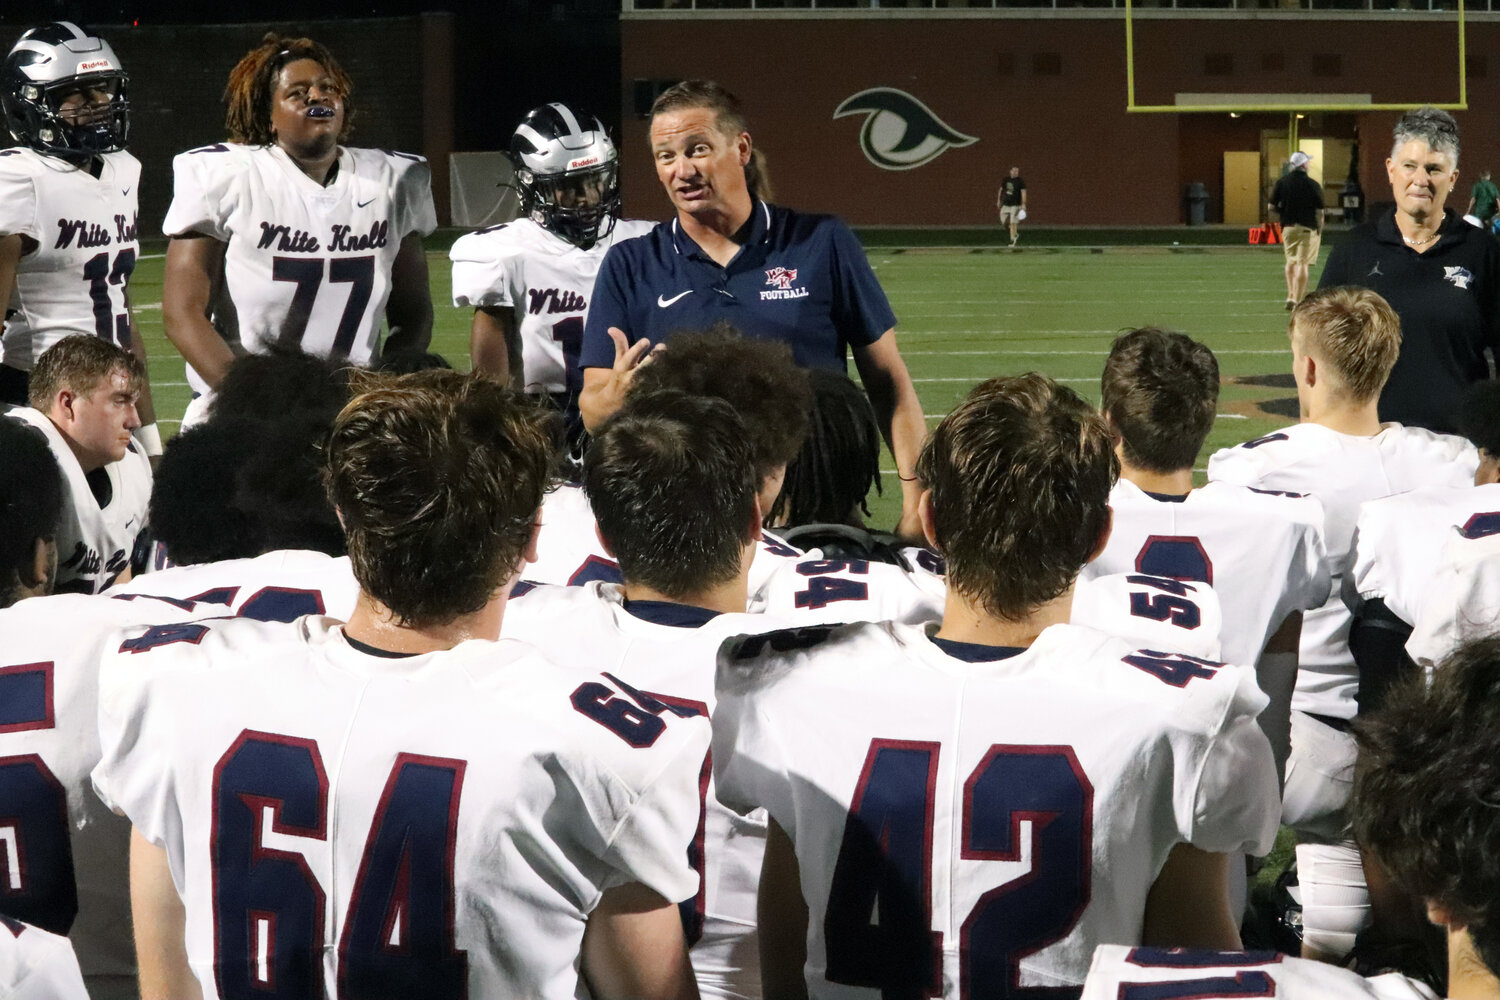 White Knoll head coach Nick Pelham addresses his team after their impressive 40-0 win over River Bluff Sept. 29.